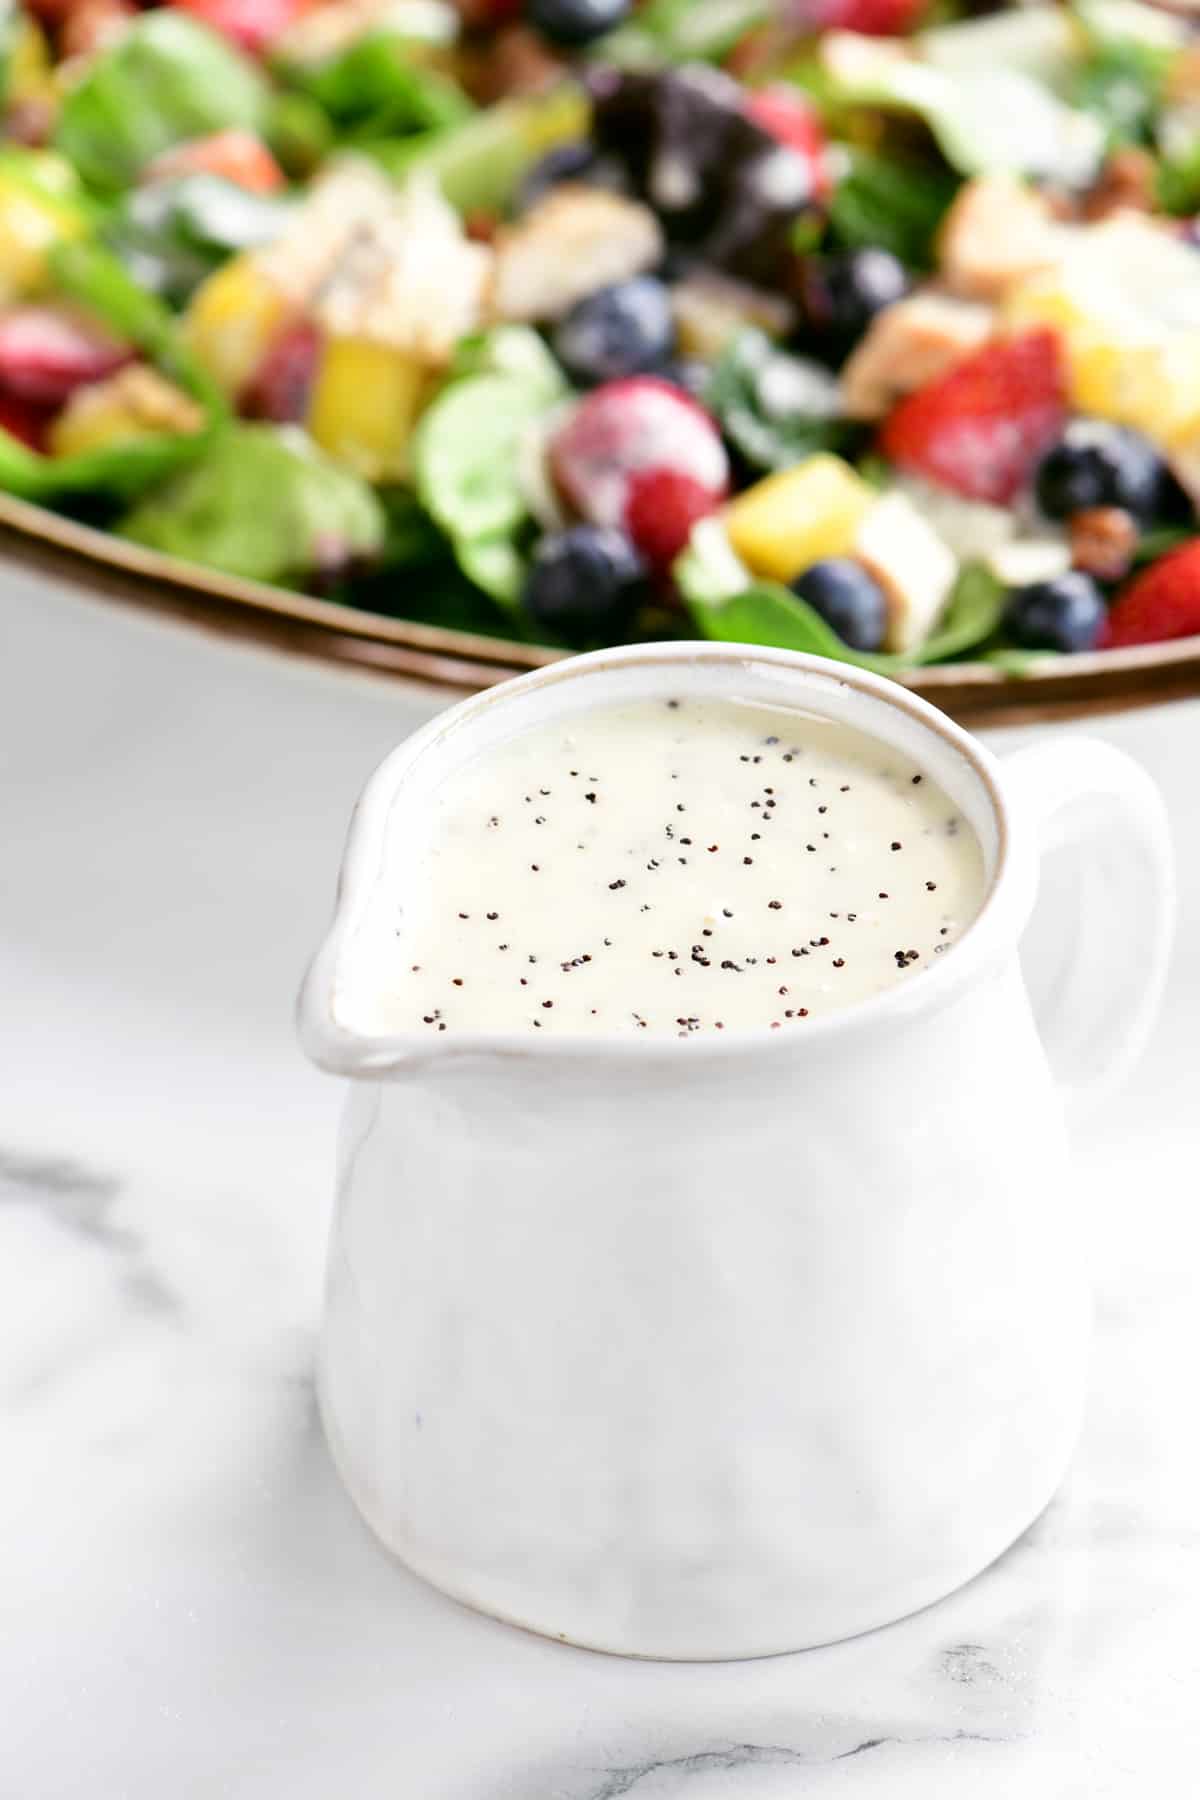 poppy seed dressing and a strawberry spinach salad.